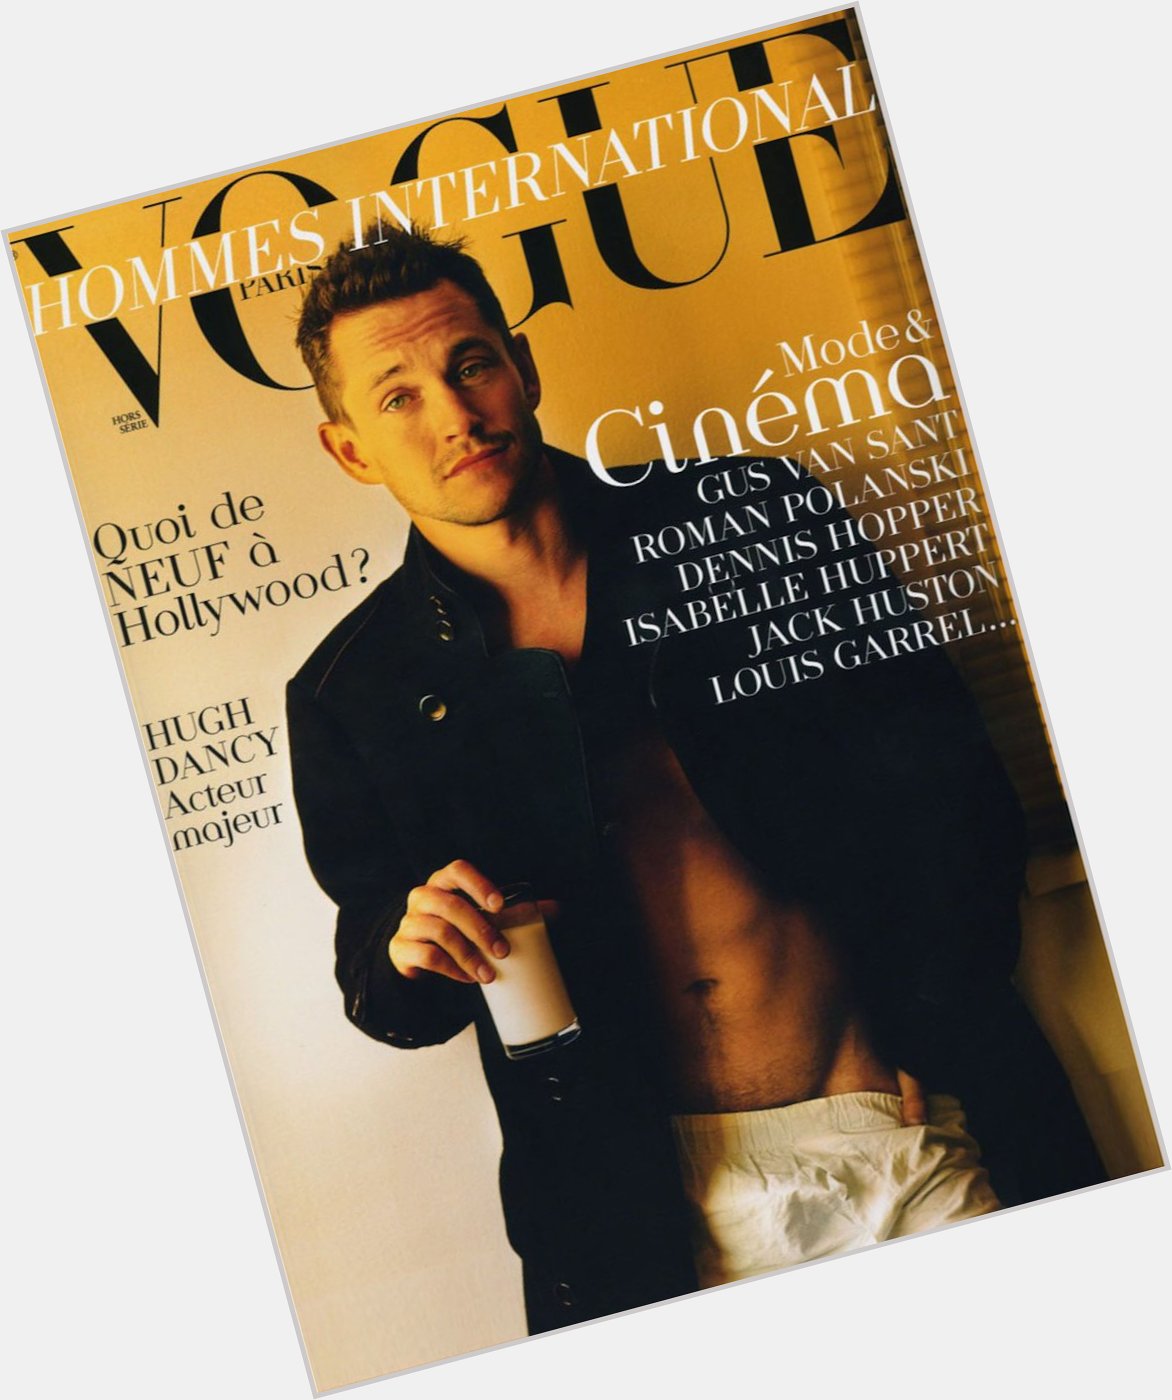 Happy birthday to Hugh Dancy --
I am still not over this magazine cover
and I never will be 